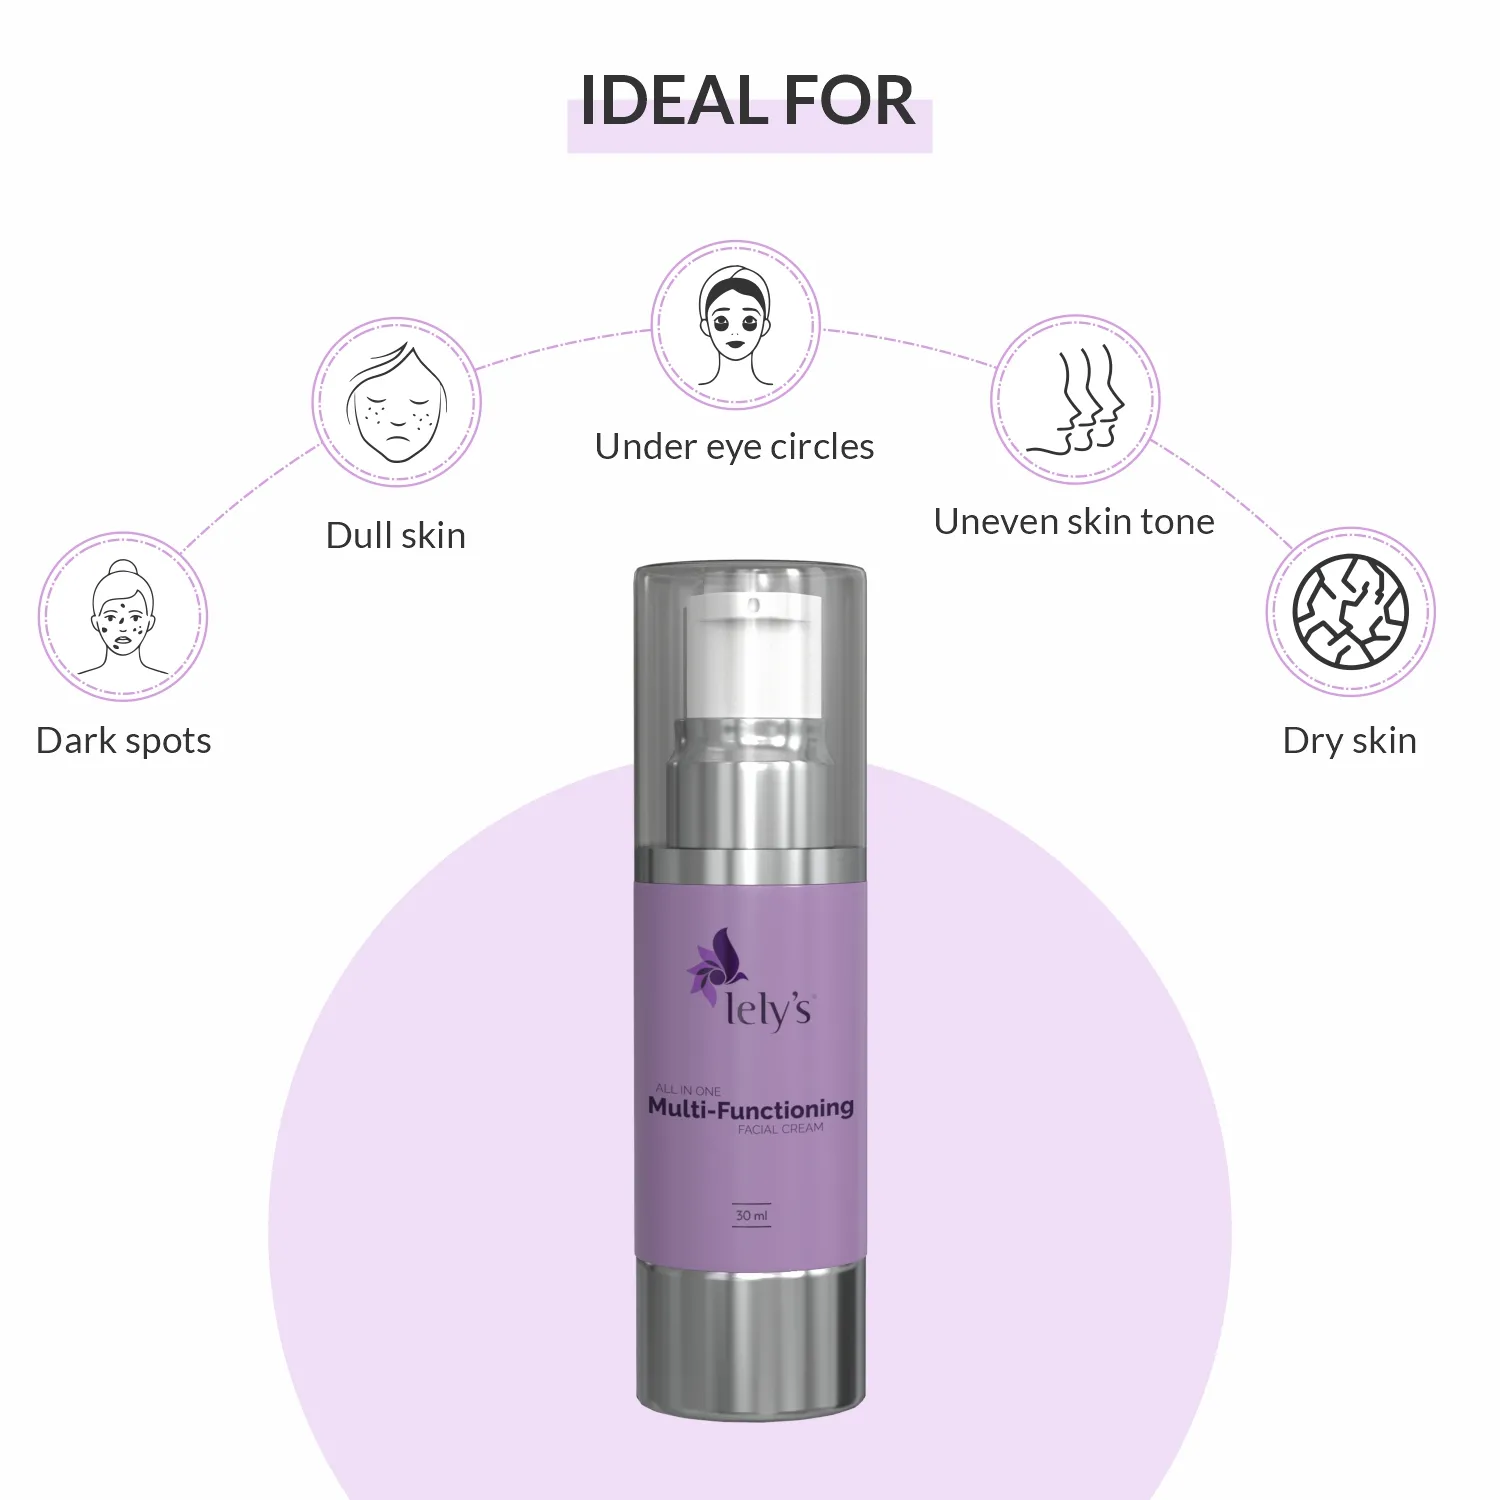 All In One Multi-Functioning Face Cream Ideal For